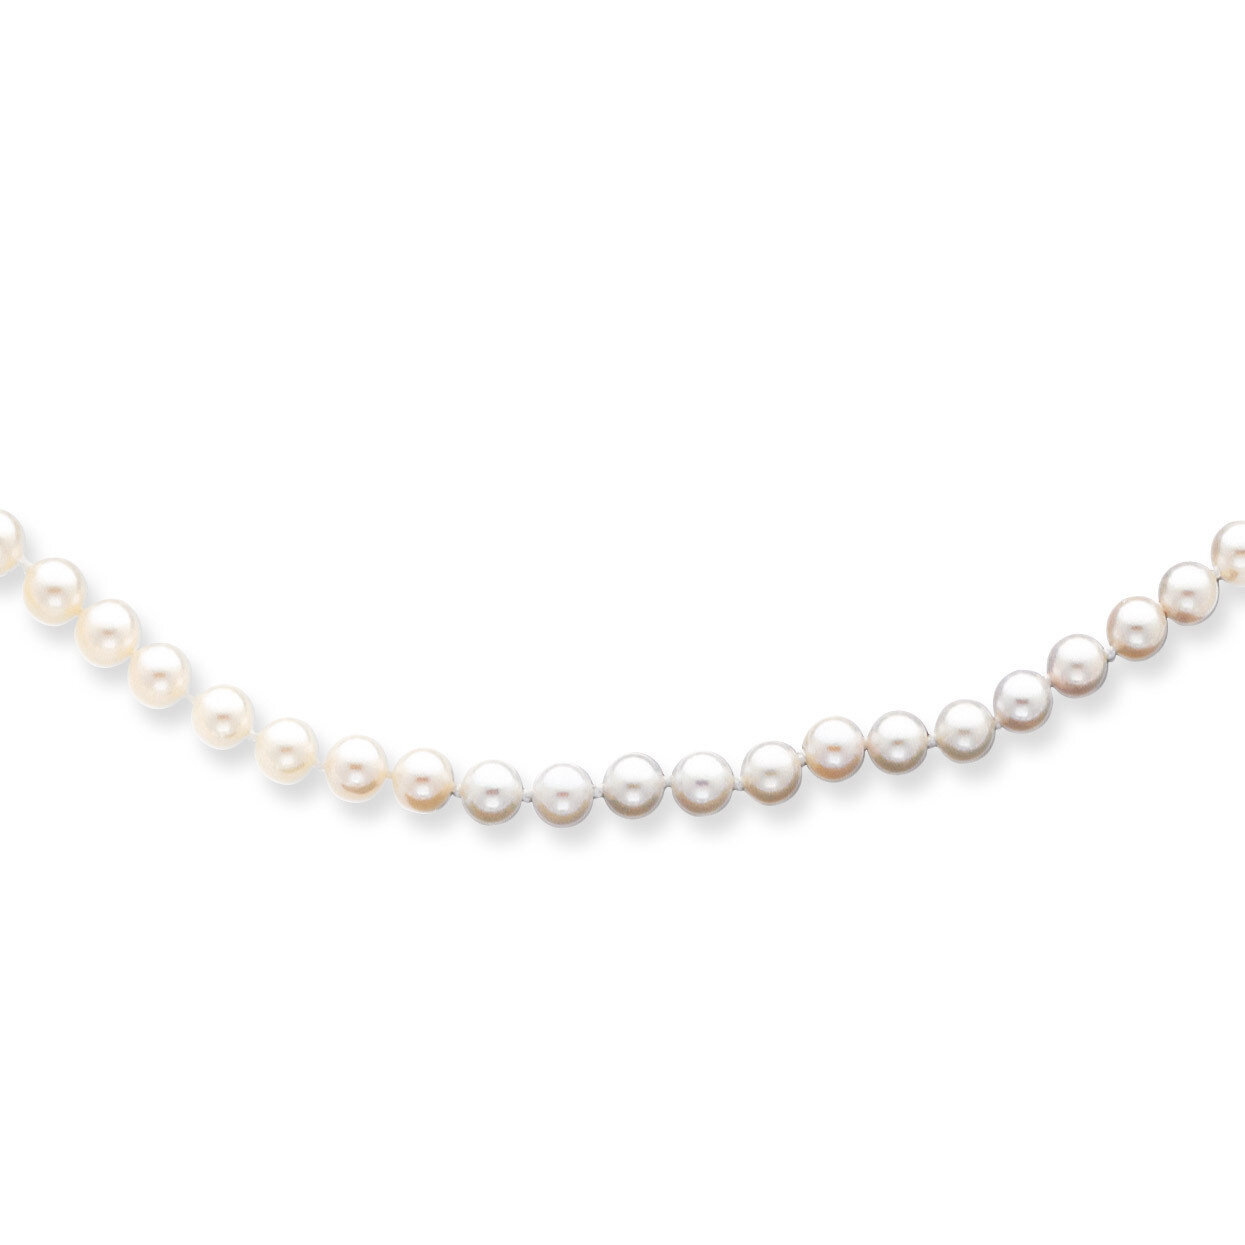 5-6mm Round White Saltwater Akoya Cultured Pearl Necklace 16 Inch 14k Gold PL50A-16